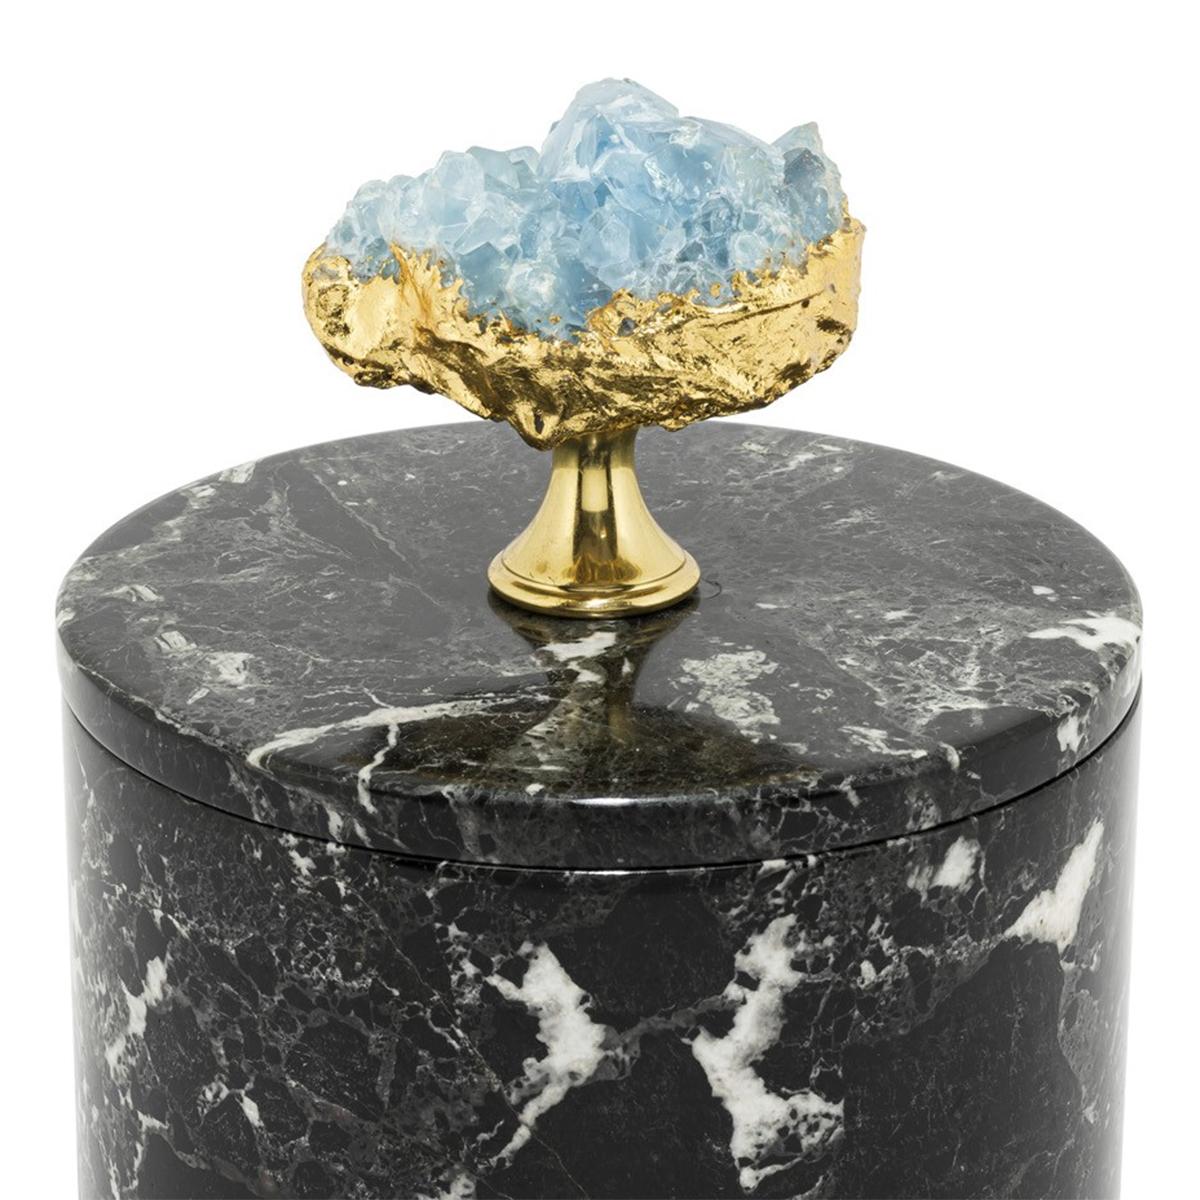 Box selenite and marble medium in black marble
with lid. With natural selenite on lid's top.